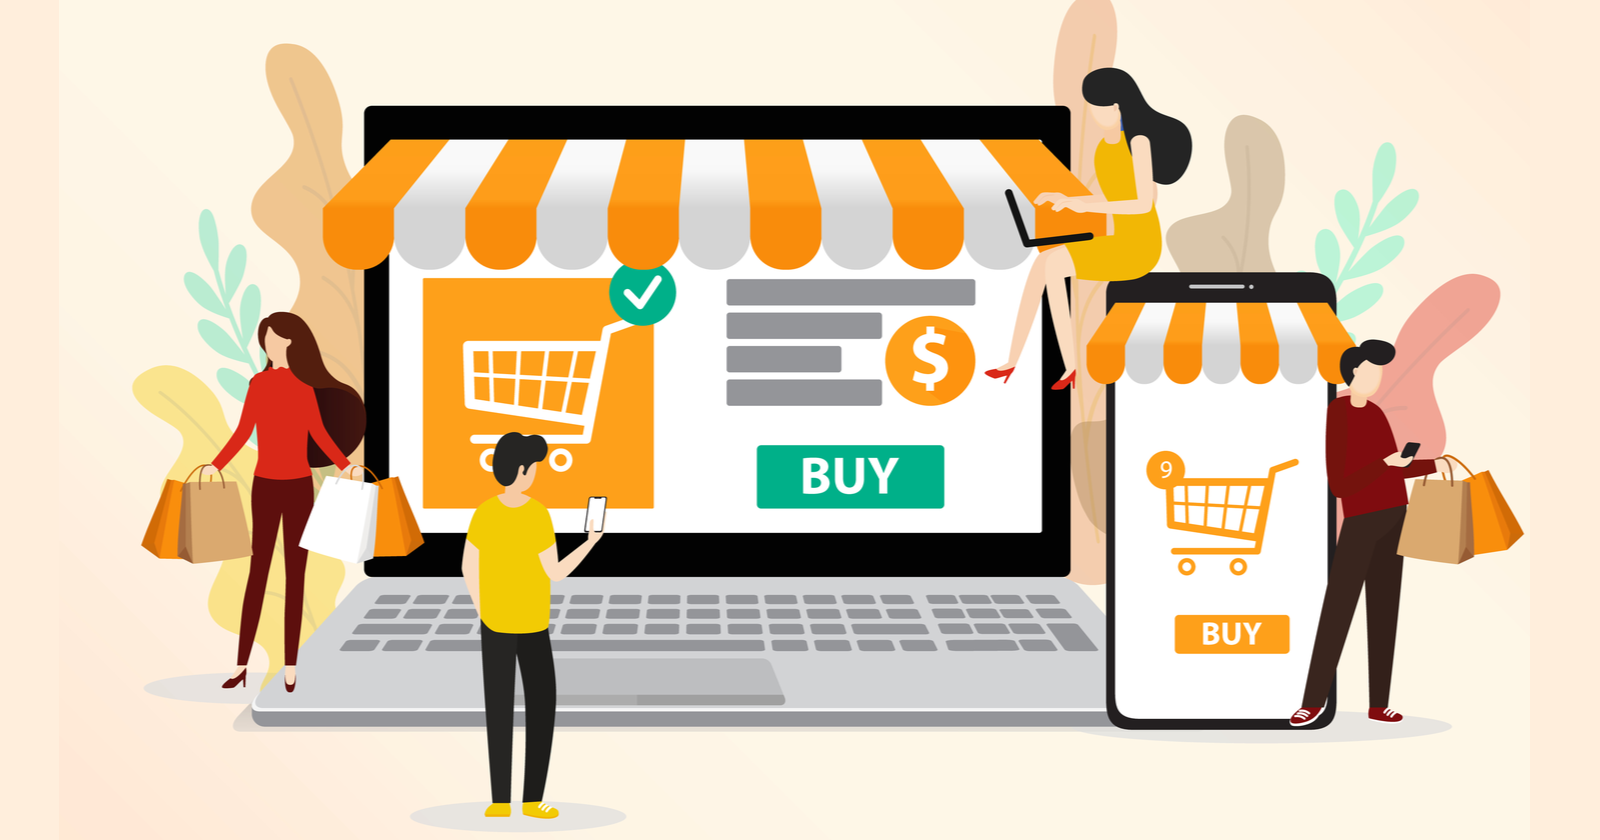 ecommerce-mcommerce-featured-image-5fd09a3a5ff2a.png